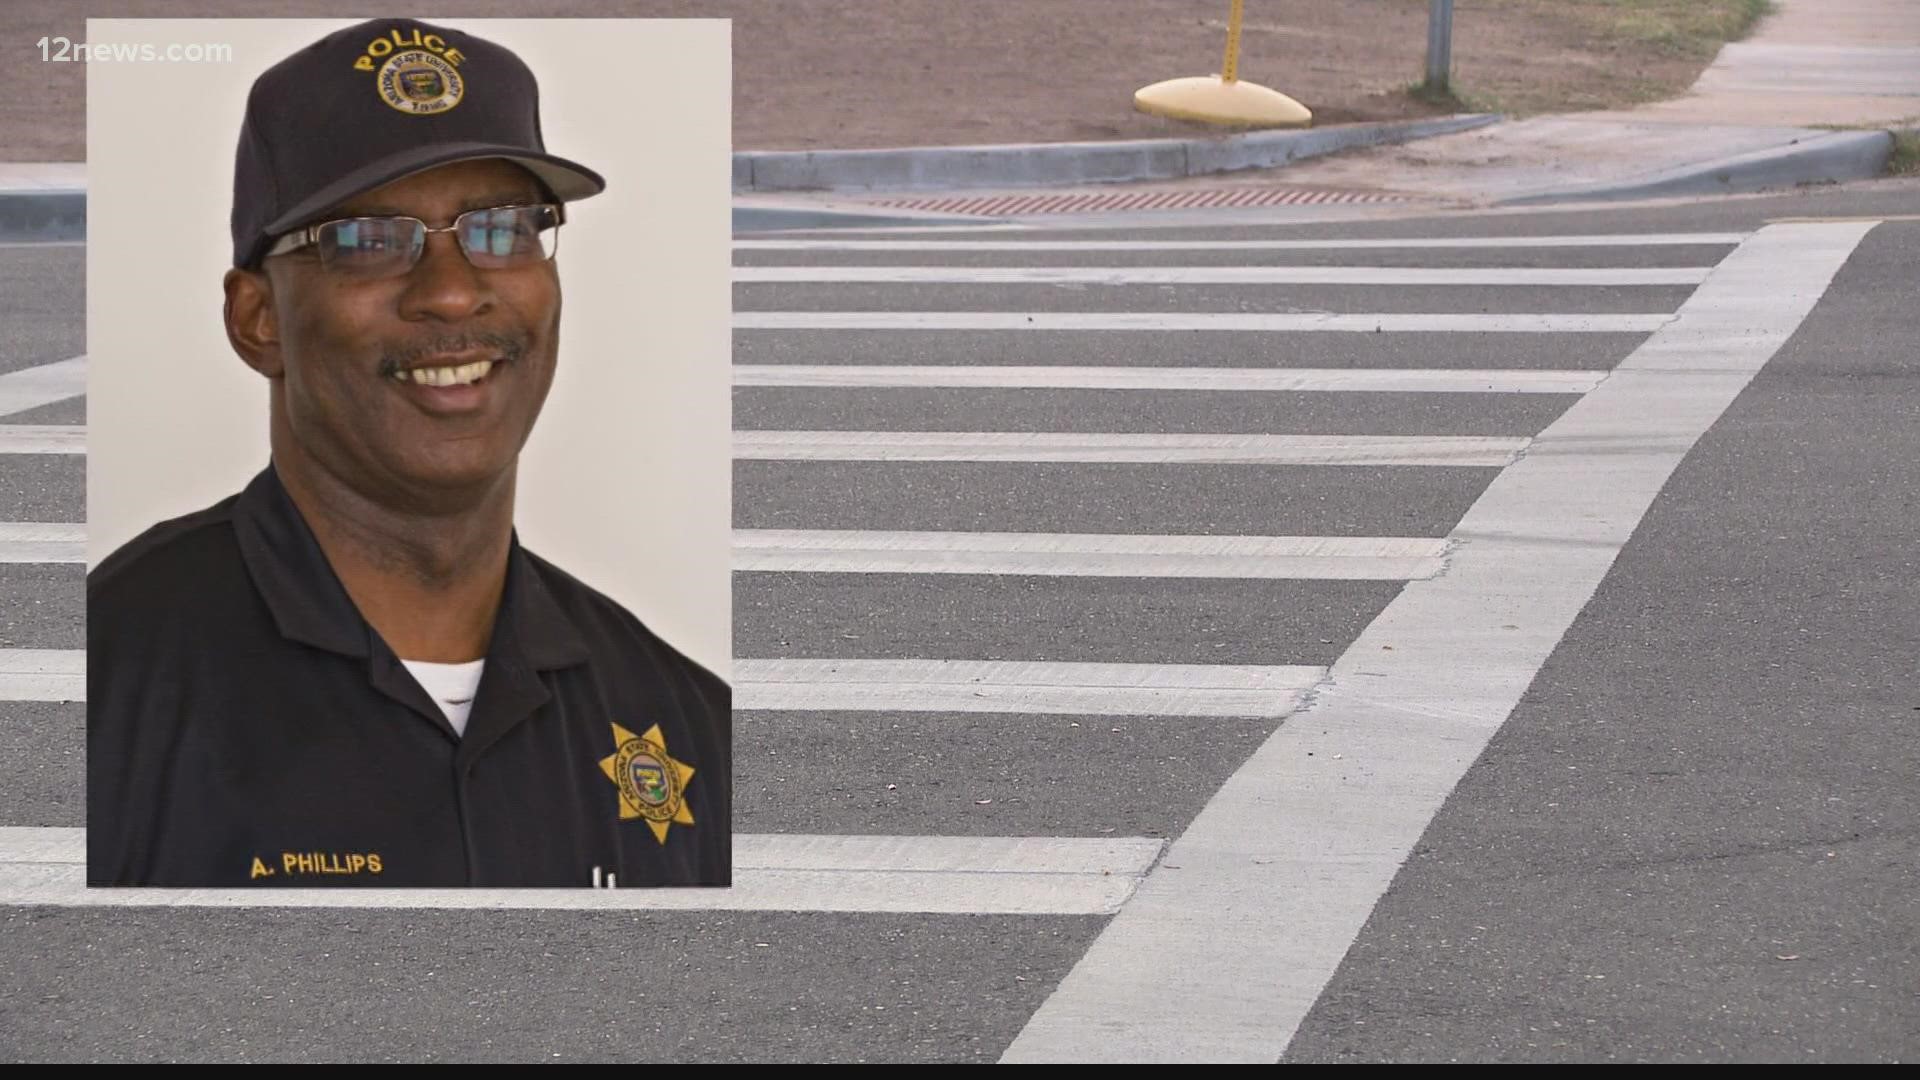 The Arizona State University Police Department is mourning the loss of Retired Sgt. Albert Phillips who was struck and killed in Tempe Friday.